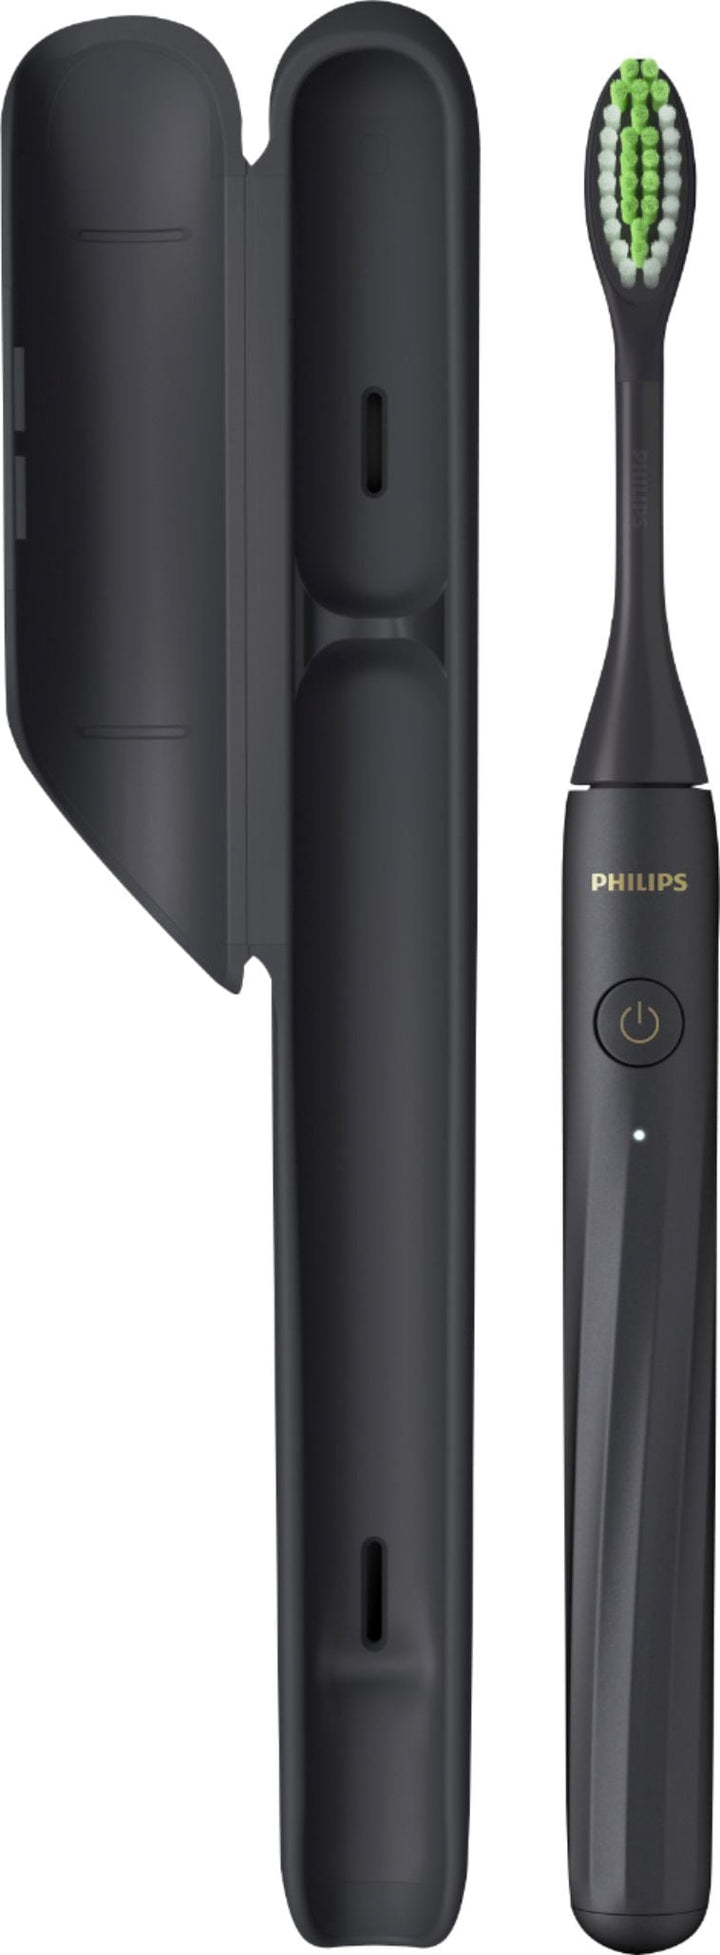 Philips Sonicare - Philips One by Sonicare Rechargeable Toothbrush - Shadow_9